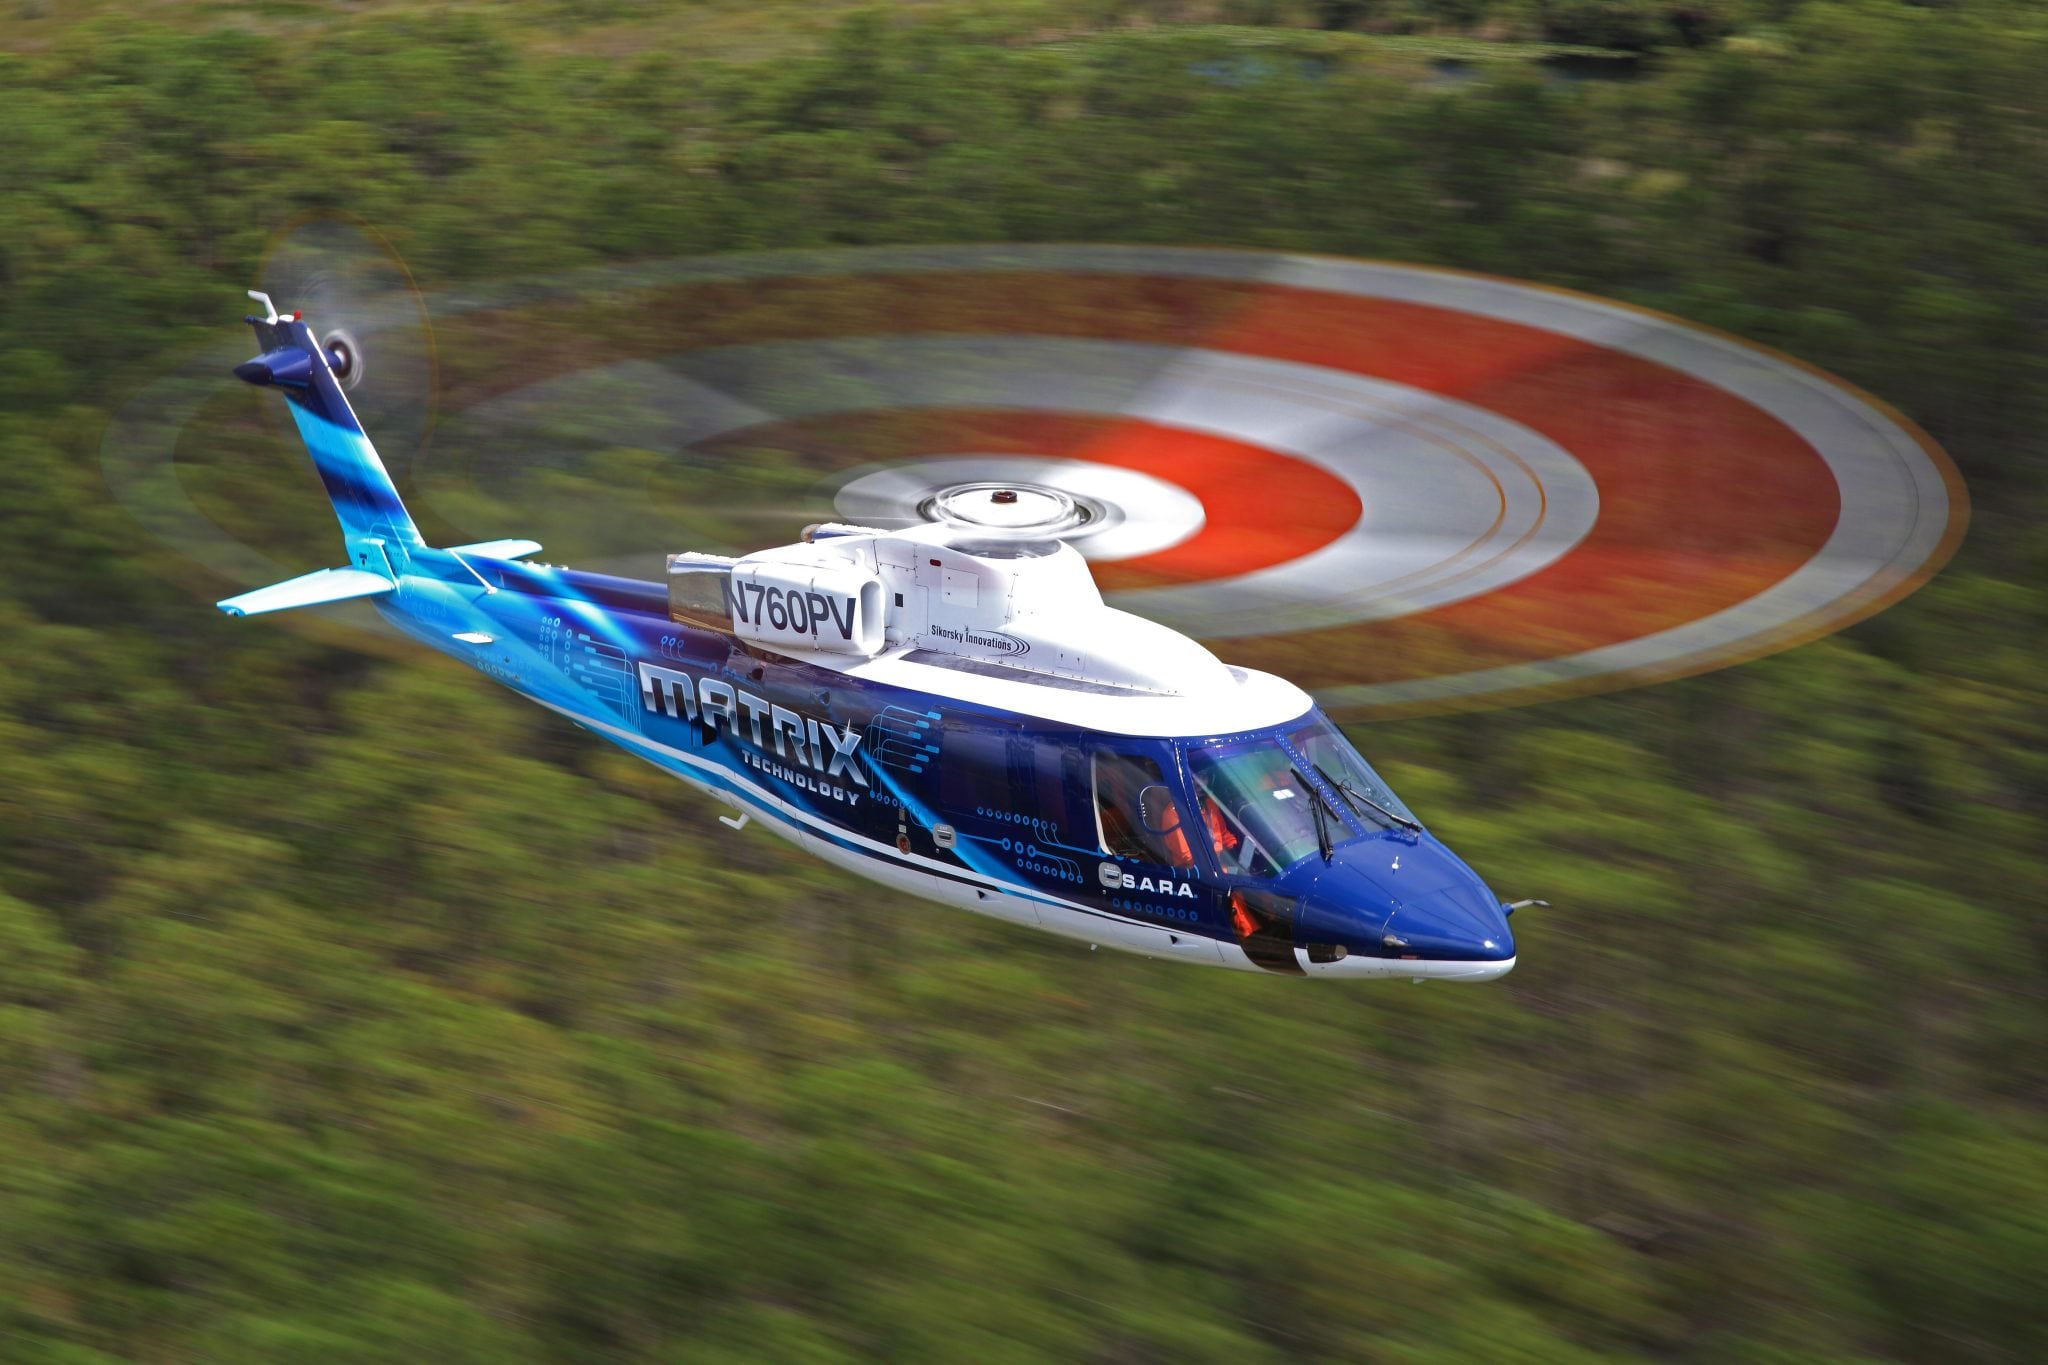 The Sikorsky Autonomy Research Aircraft equipped with Matrix technology